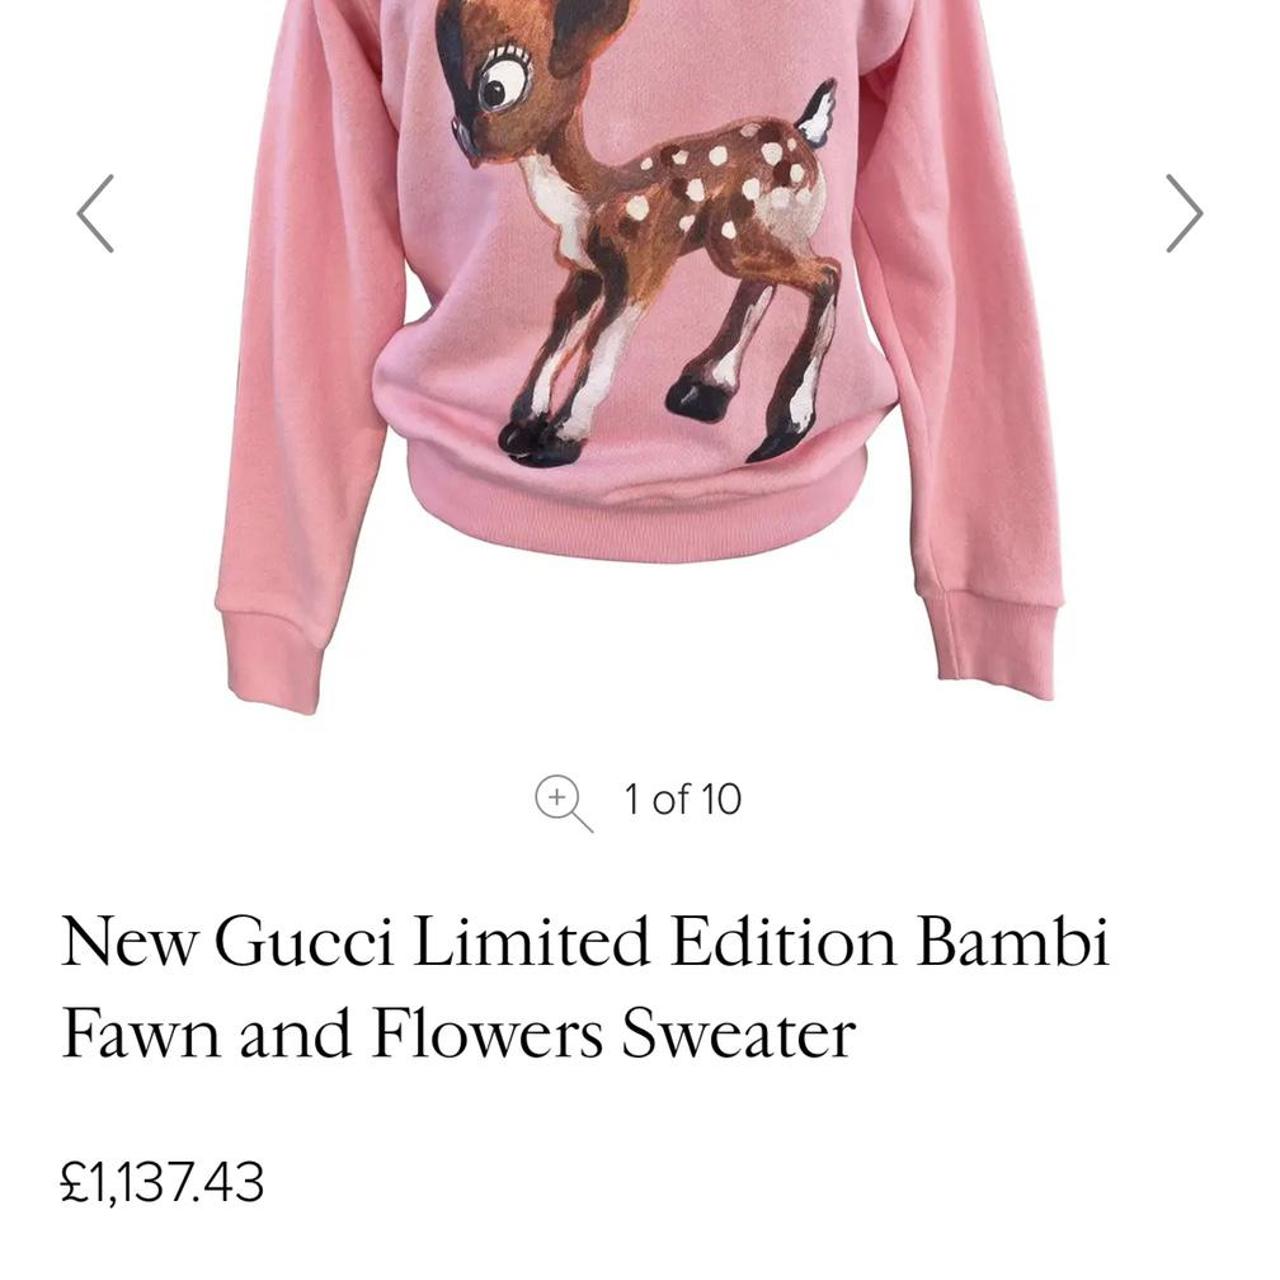 Gucci Limited Edition Bambi Fawn and Flowers